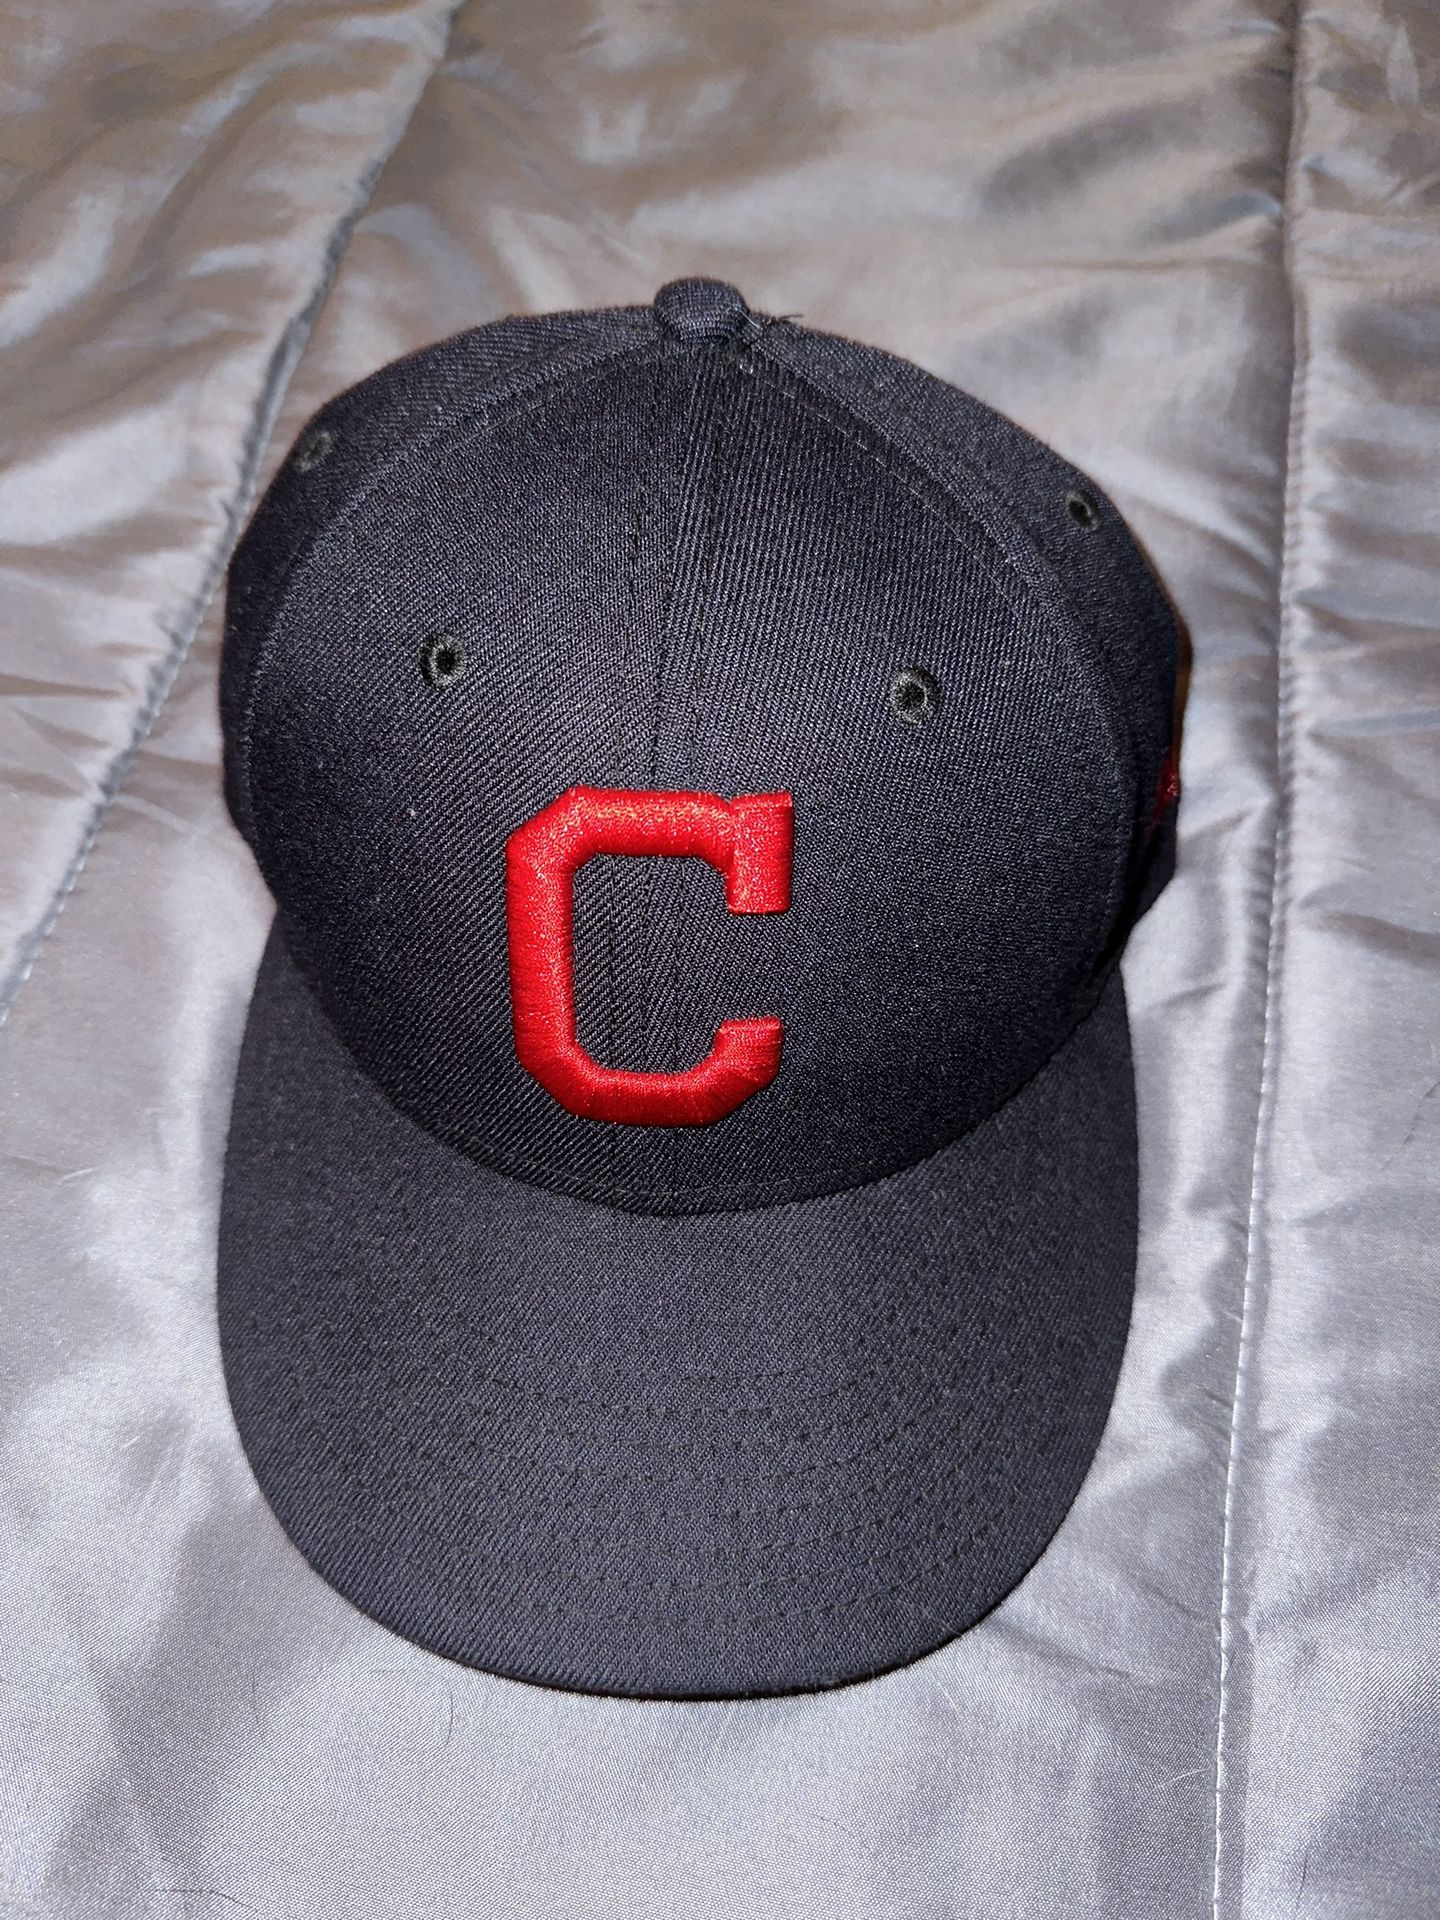 Cleveland Indians Fitted Hat New Era for Sale in Sacramento, CA - OfferUp